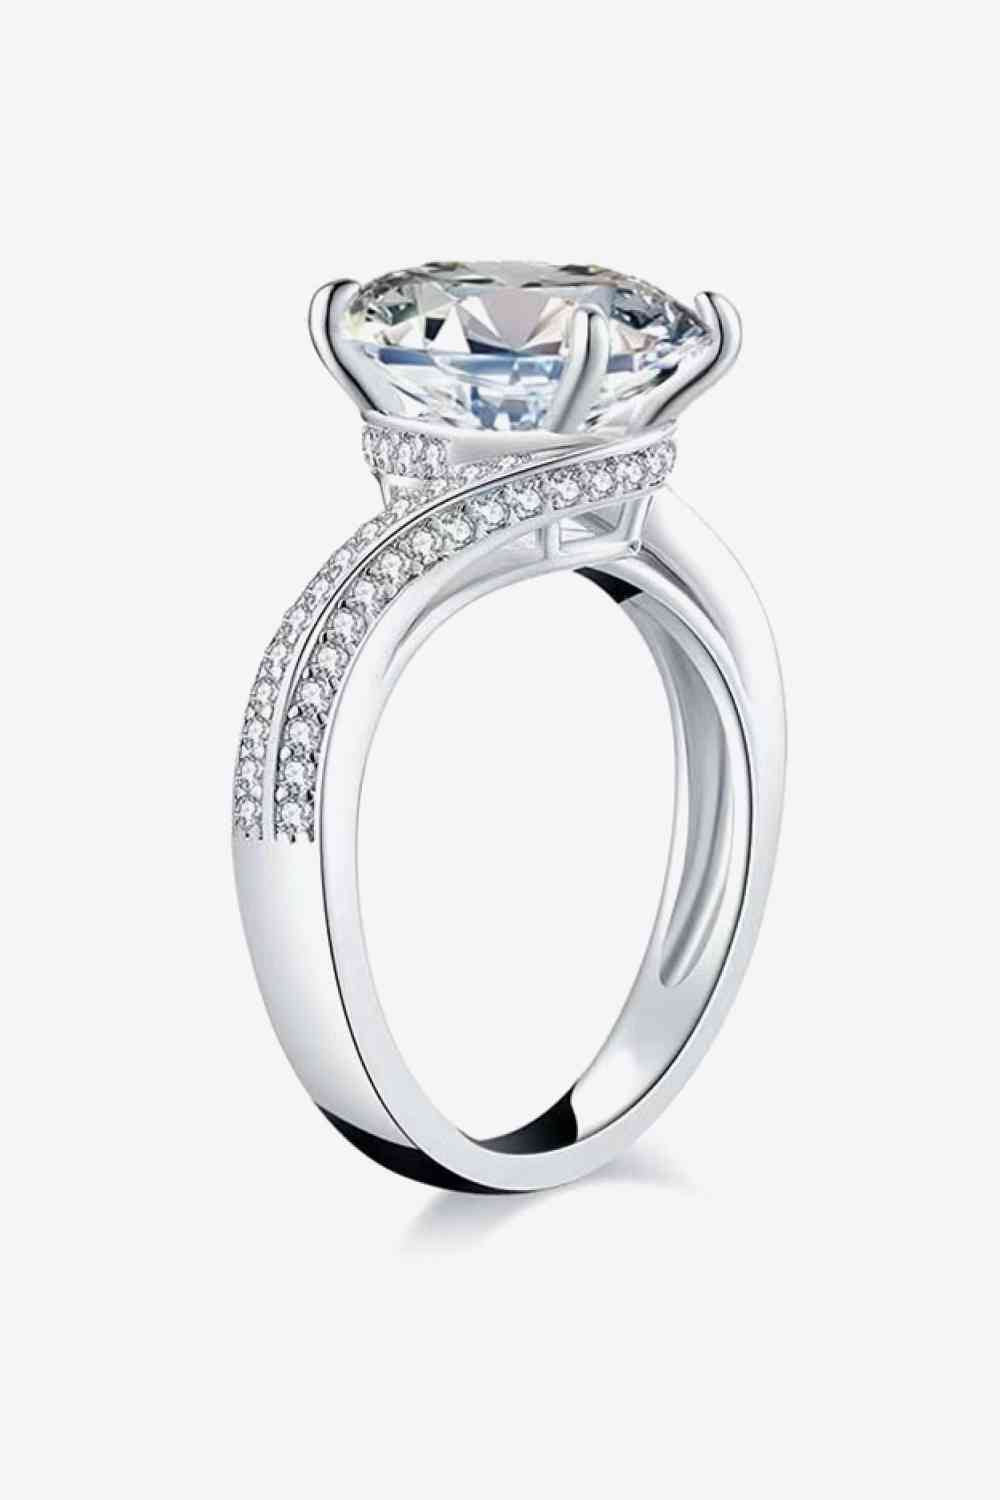 a white gold engagement ring with a round cut diamond